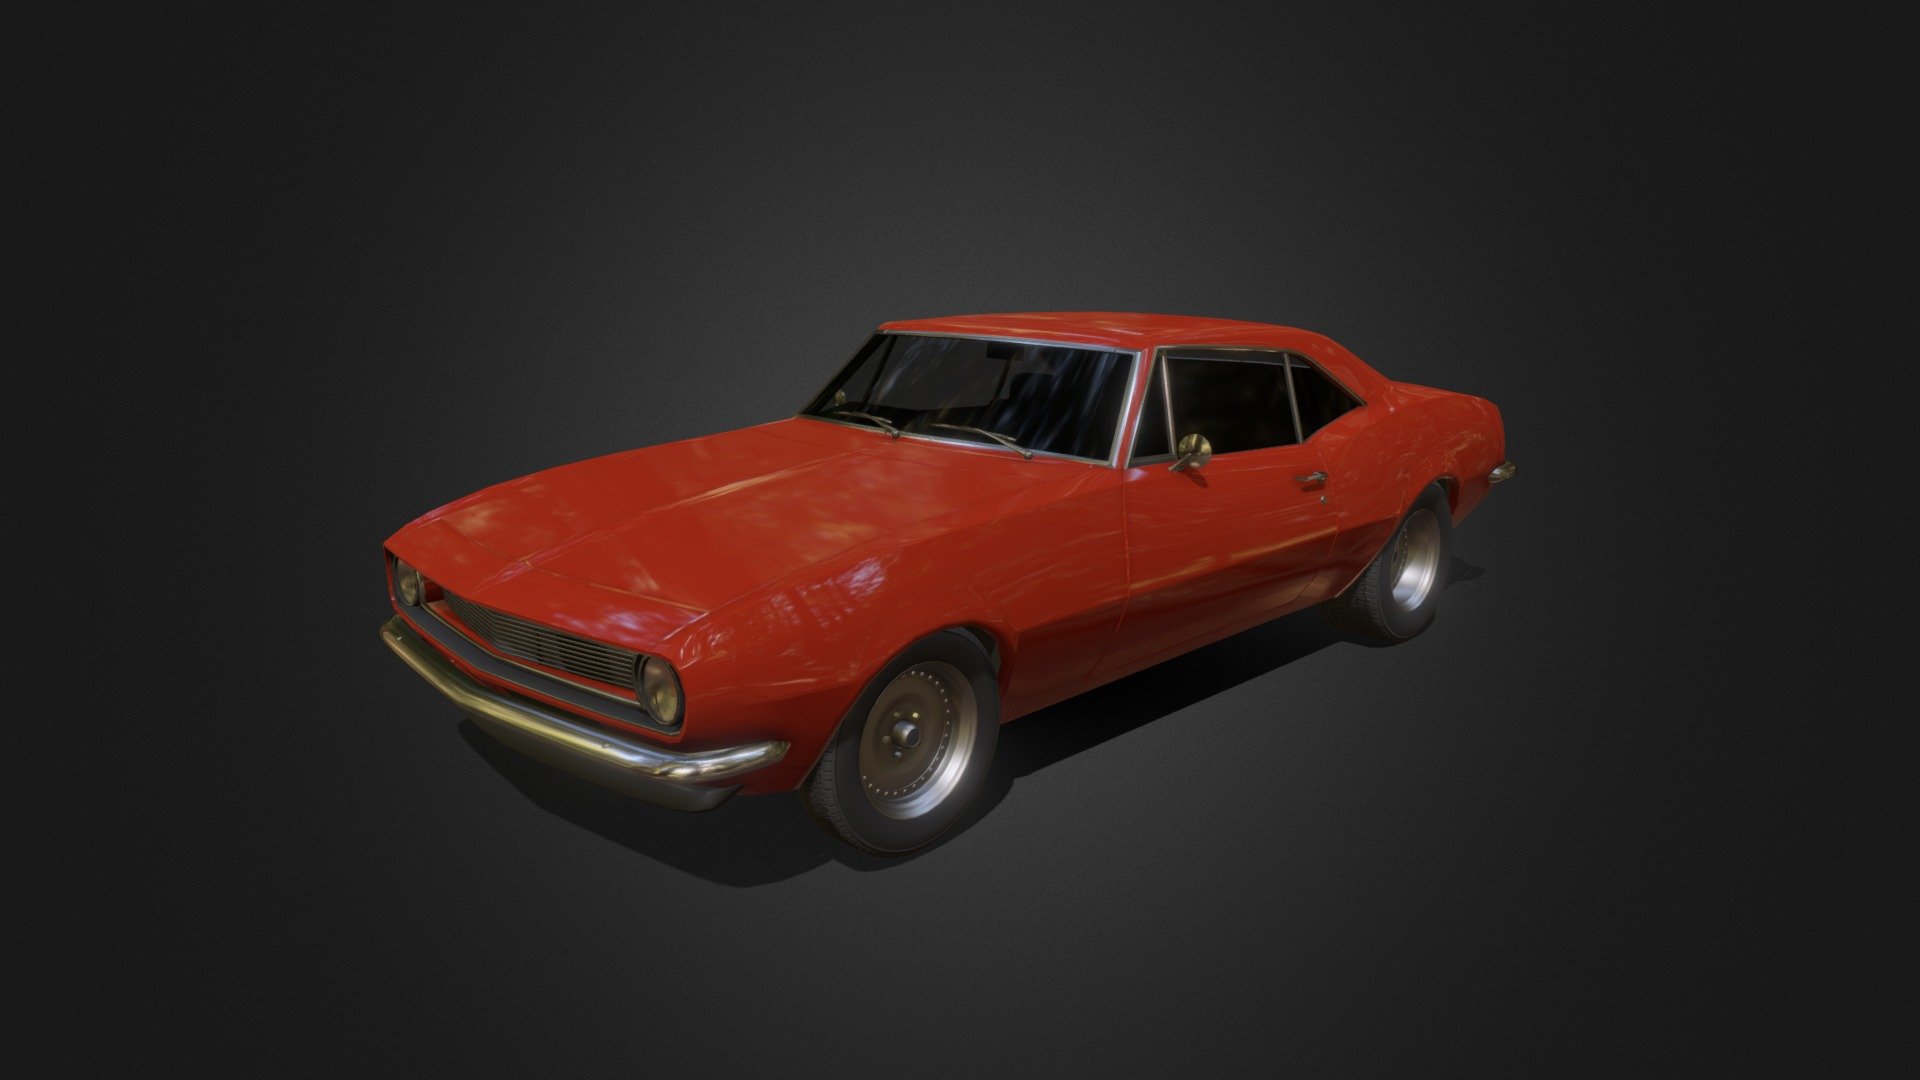 Game-ready vehicle model with Textures, 4 LOD states, and simplified collision meshes.

Vehicle model is based on 1960s car designs with classic dragster wheels 3d model